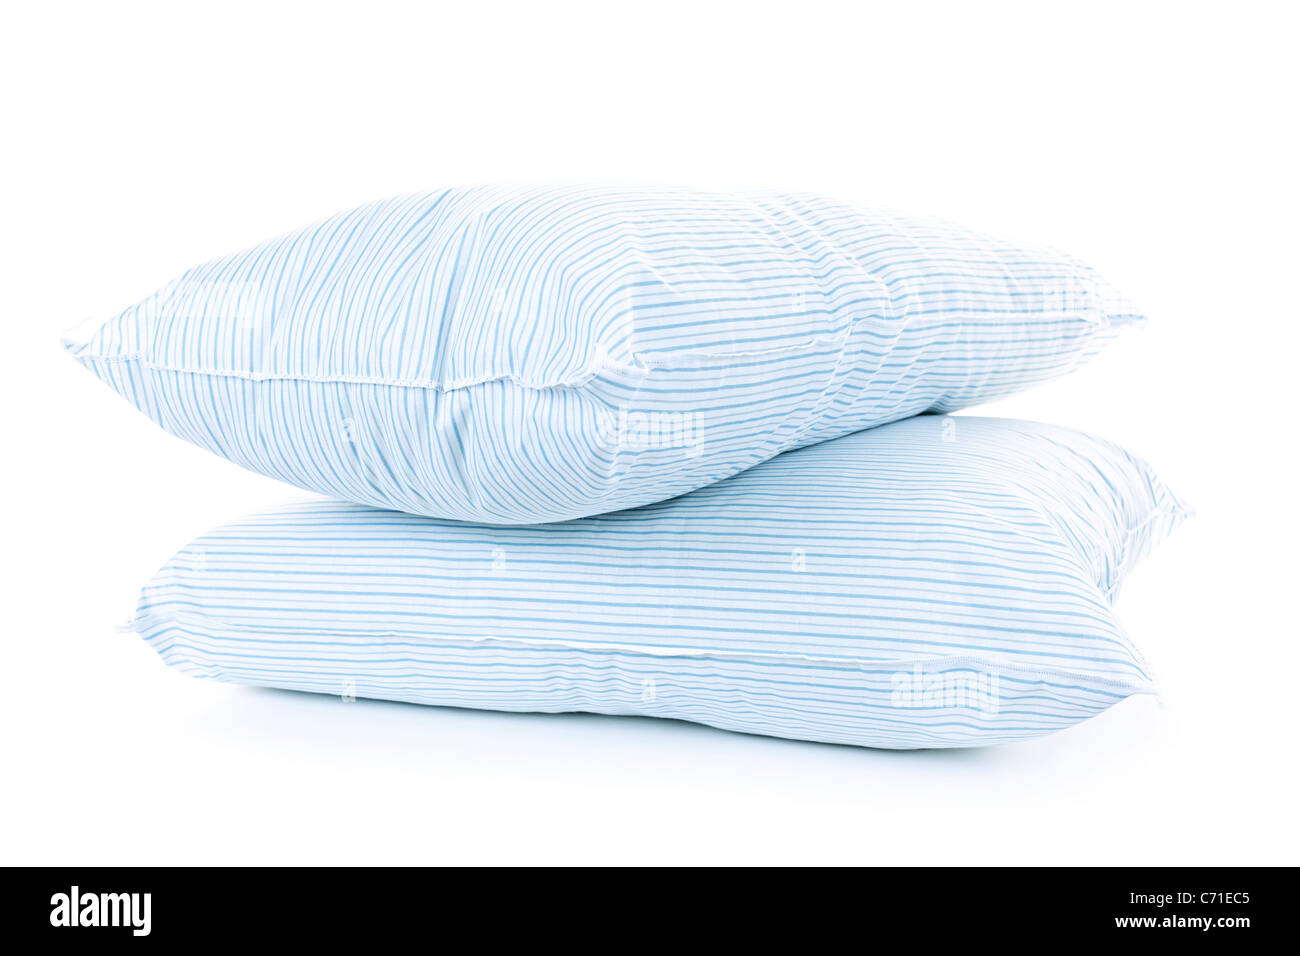 Two soft pillows with blue striped covers isolated on white background Stock Photo